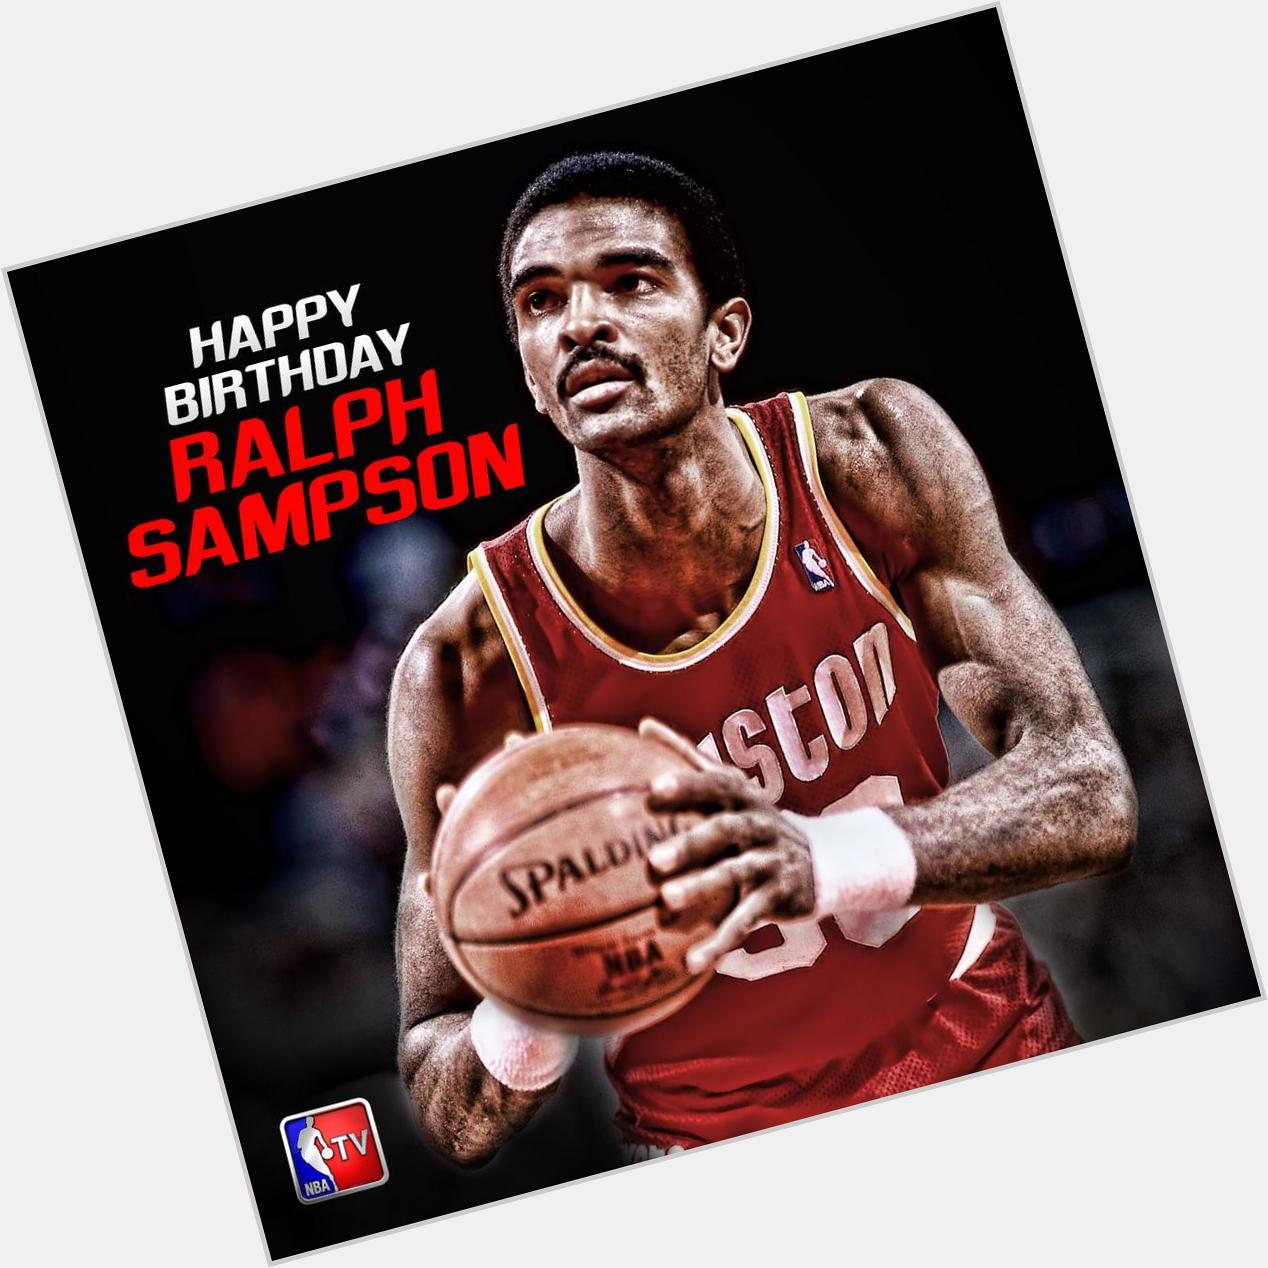  : Join us in wishing a Happy Birthday to 4-time All-Star Ralph Sampson! 